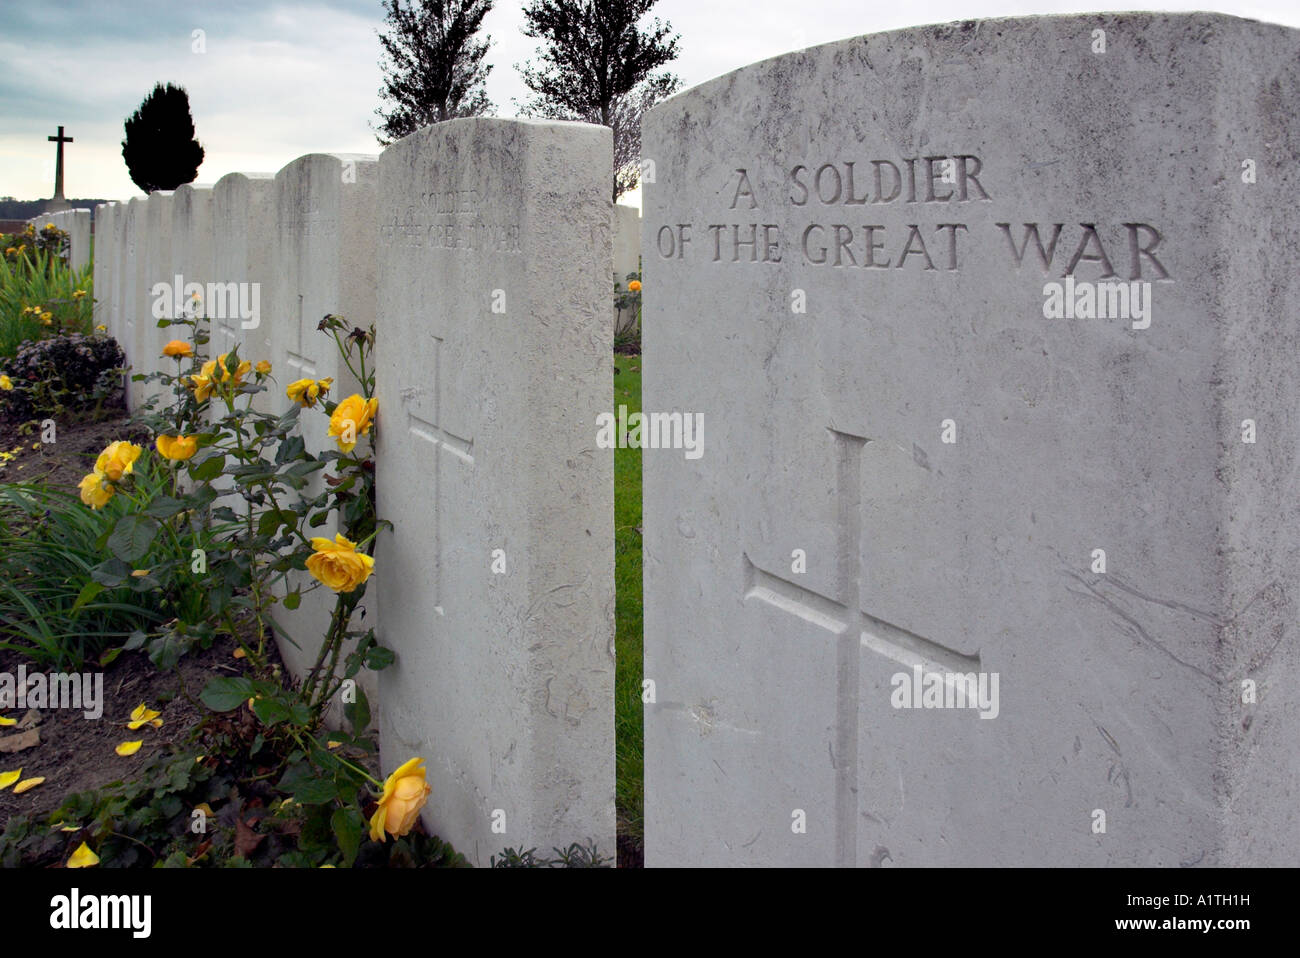 Yellow roses growing by a grave marked A Soldier of The Great War Stock Photo